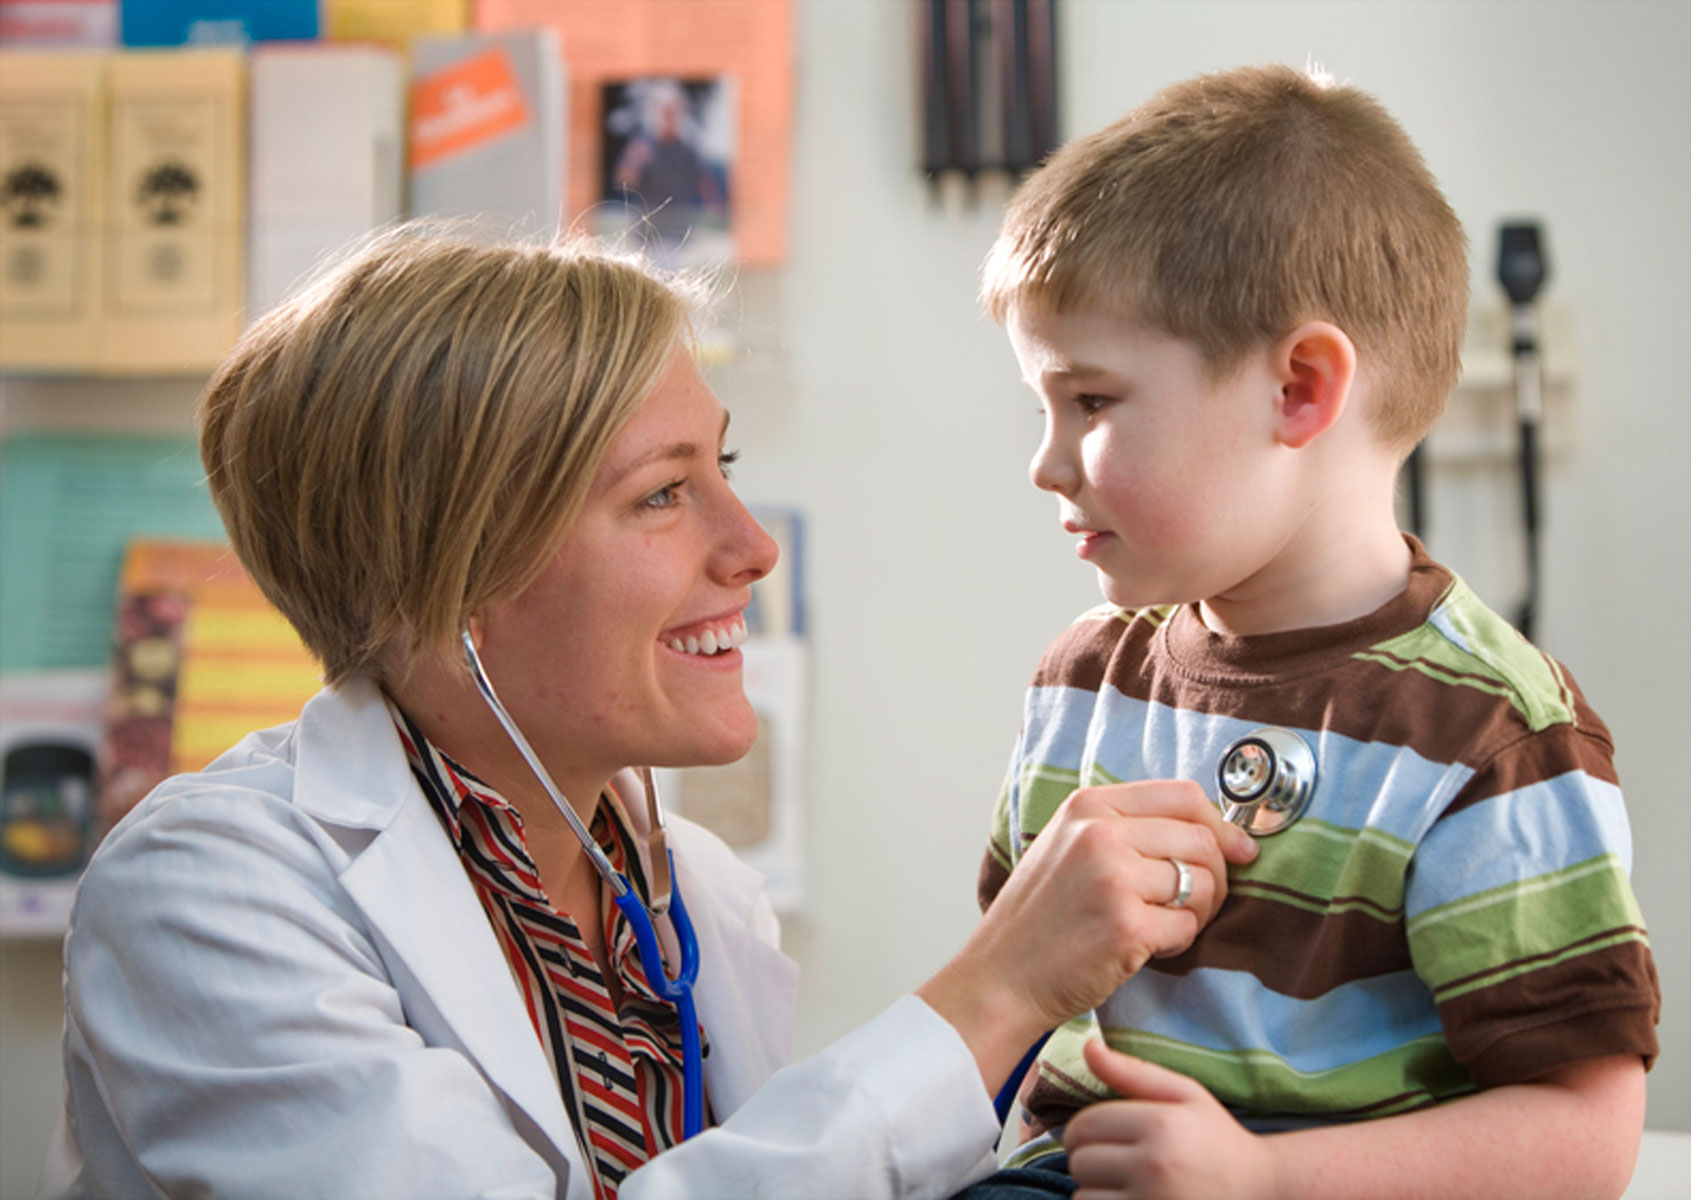 Female doctor in white coat with stethoscope examining smiling boy in striped shirt.